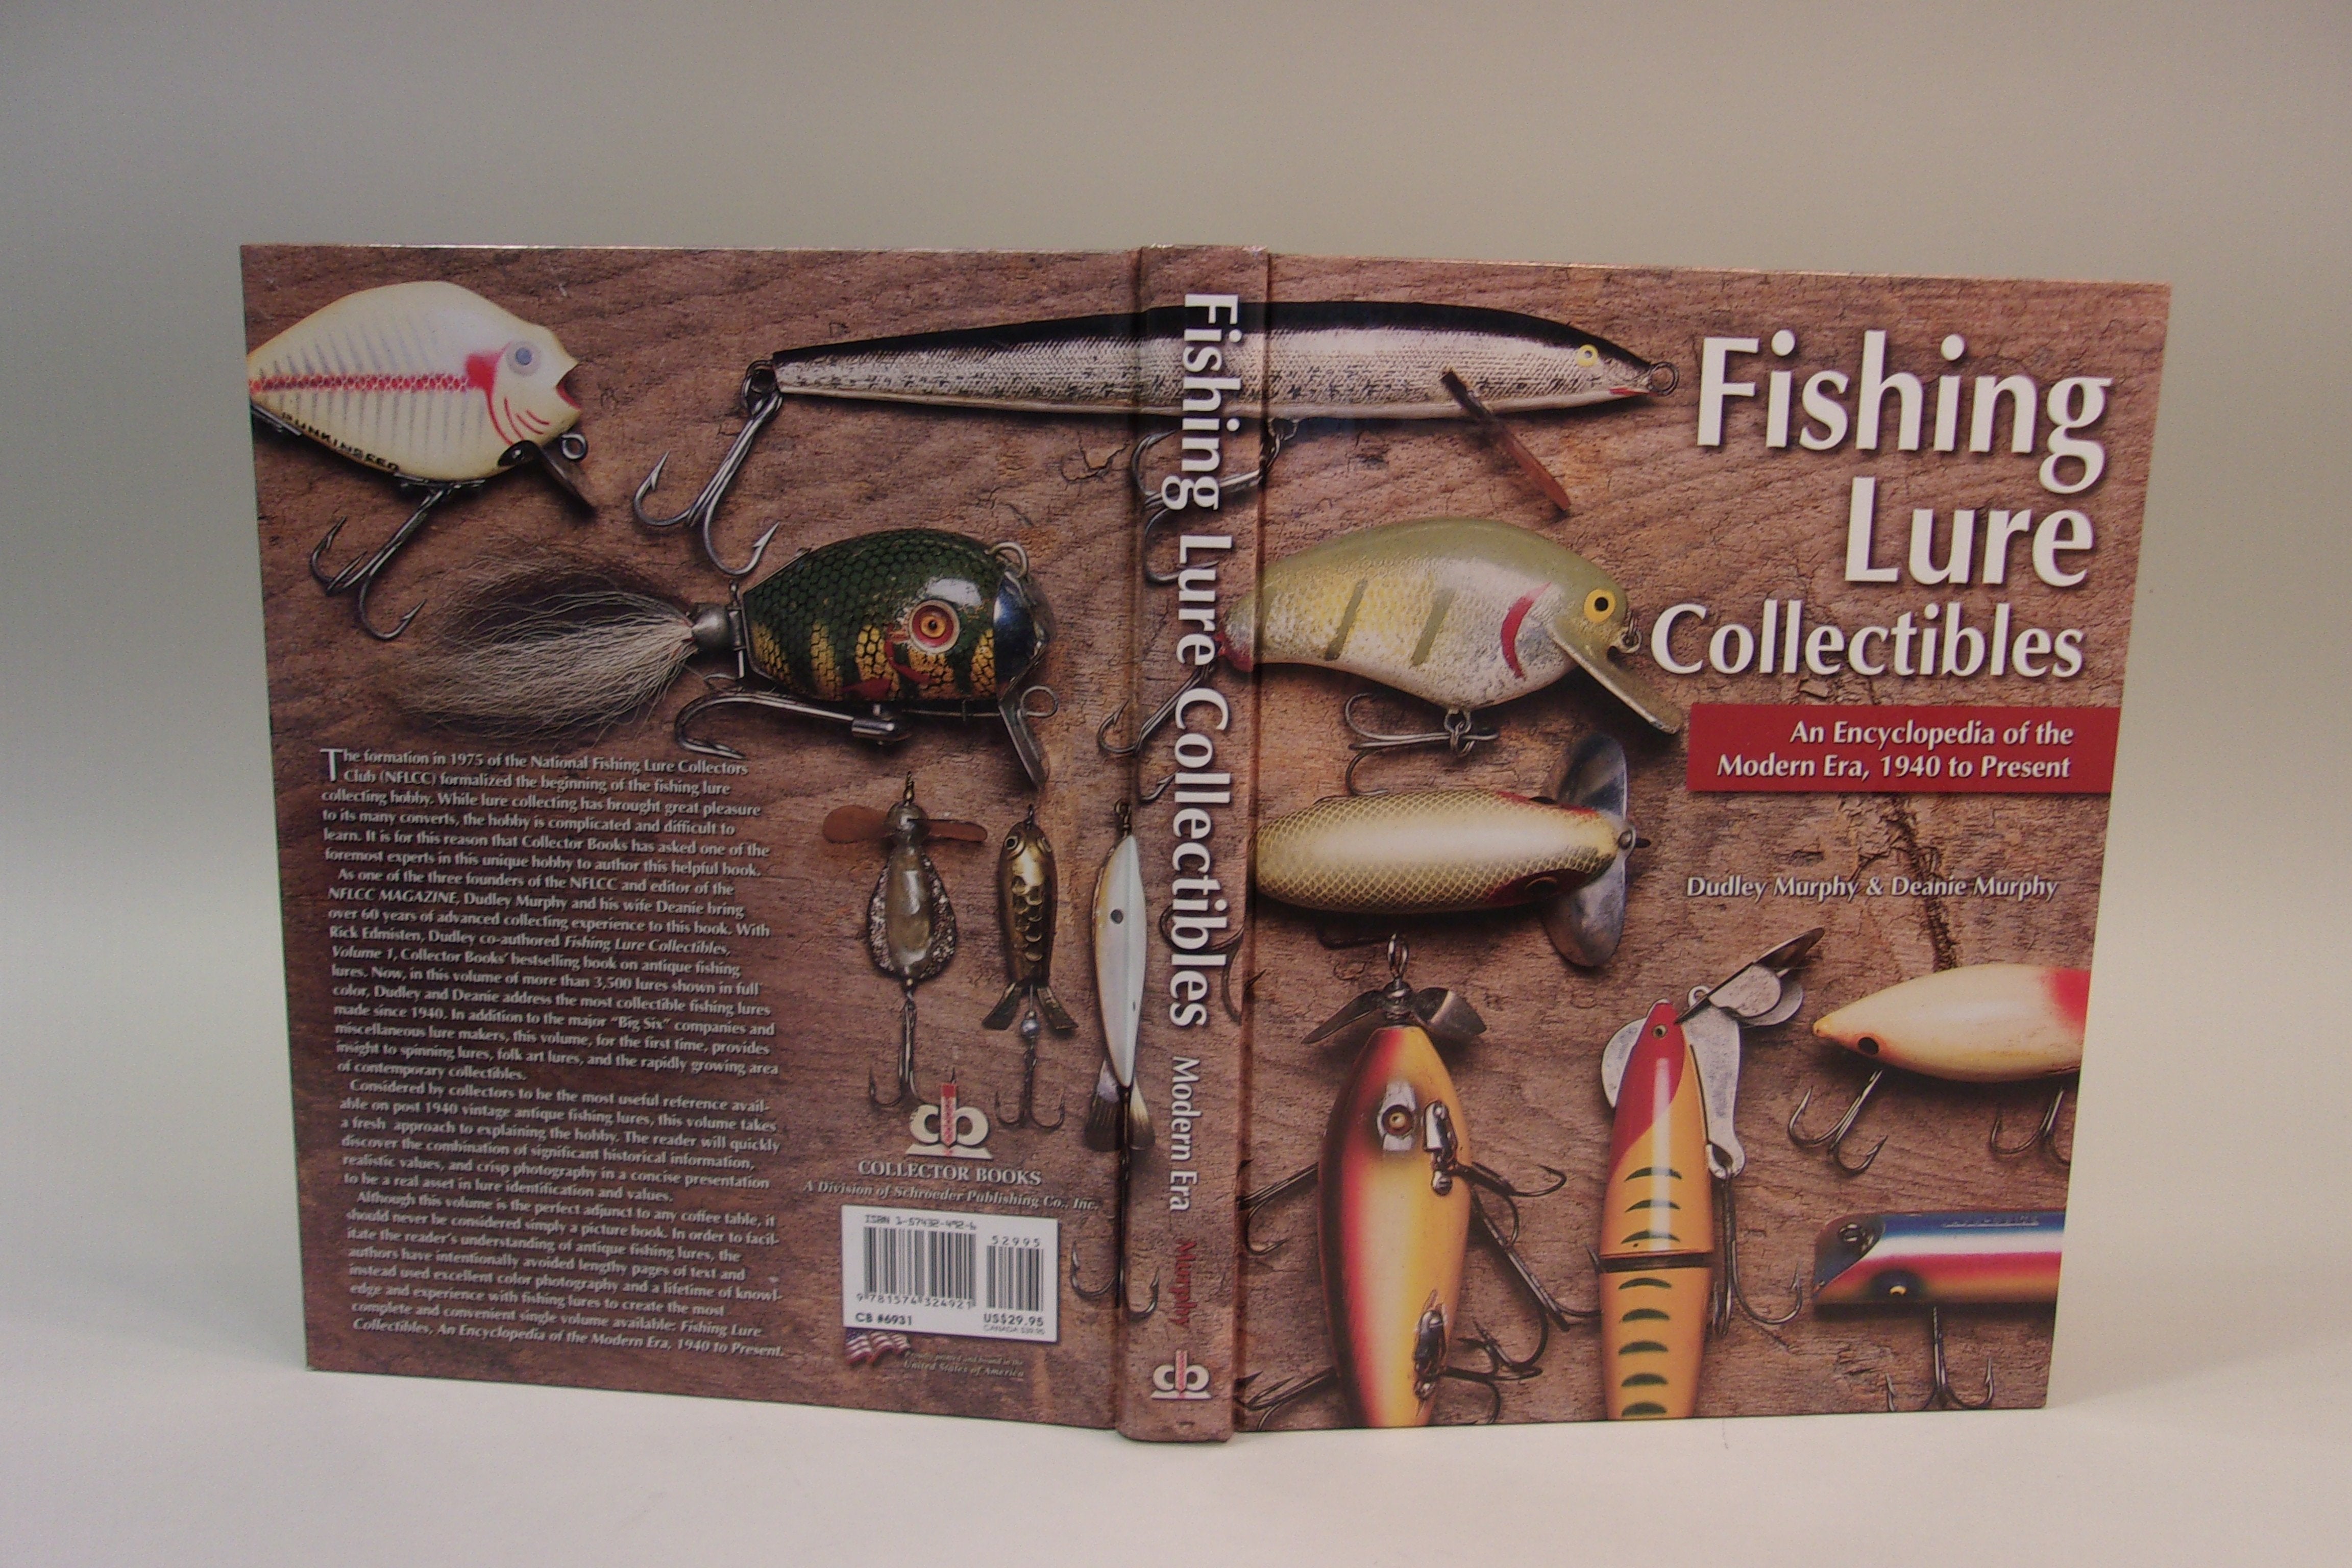 Fishing Lure Collectibles, Vol. 1: An Identification and Value